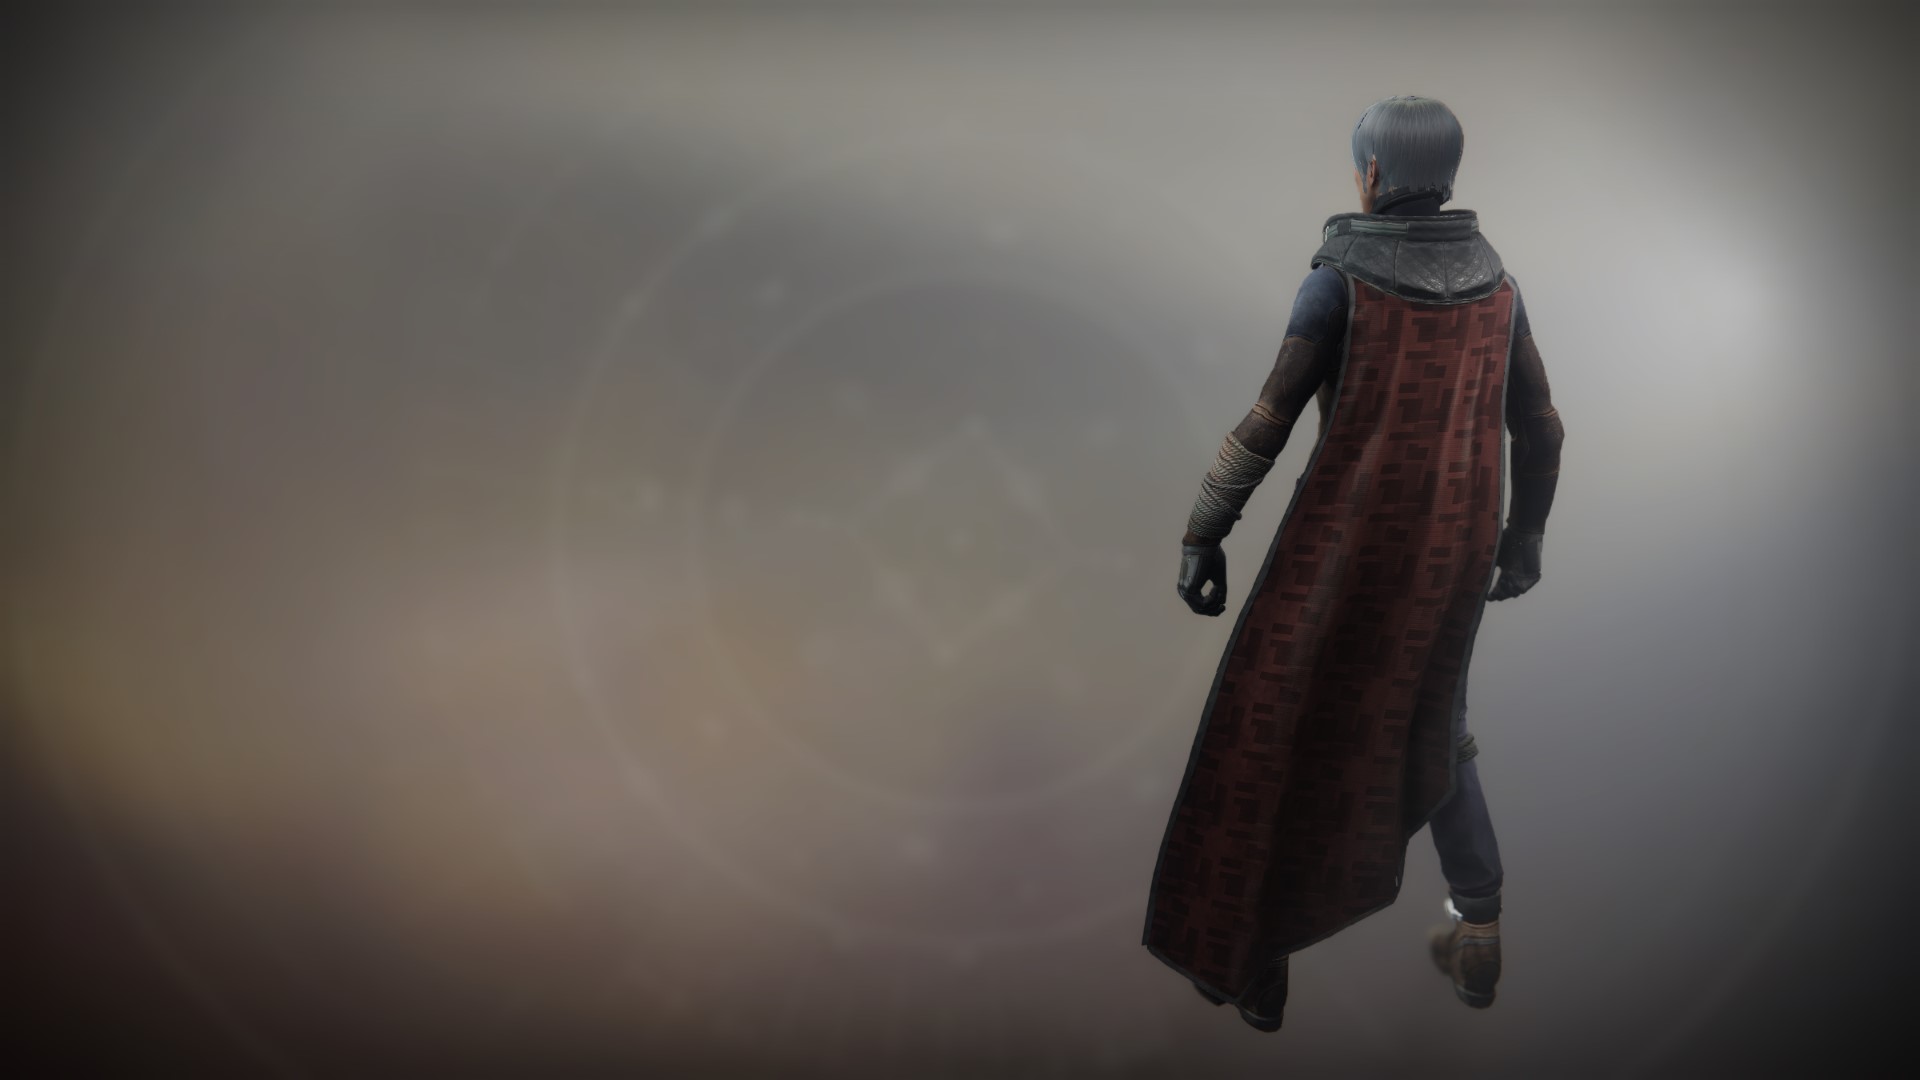 An in-game render of the Exodus Down Cloak.